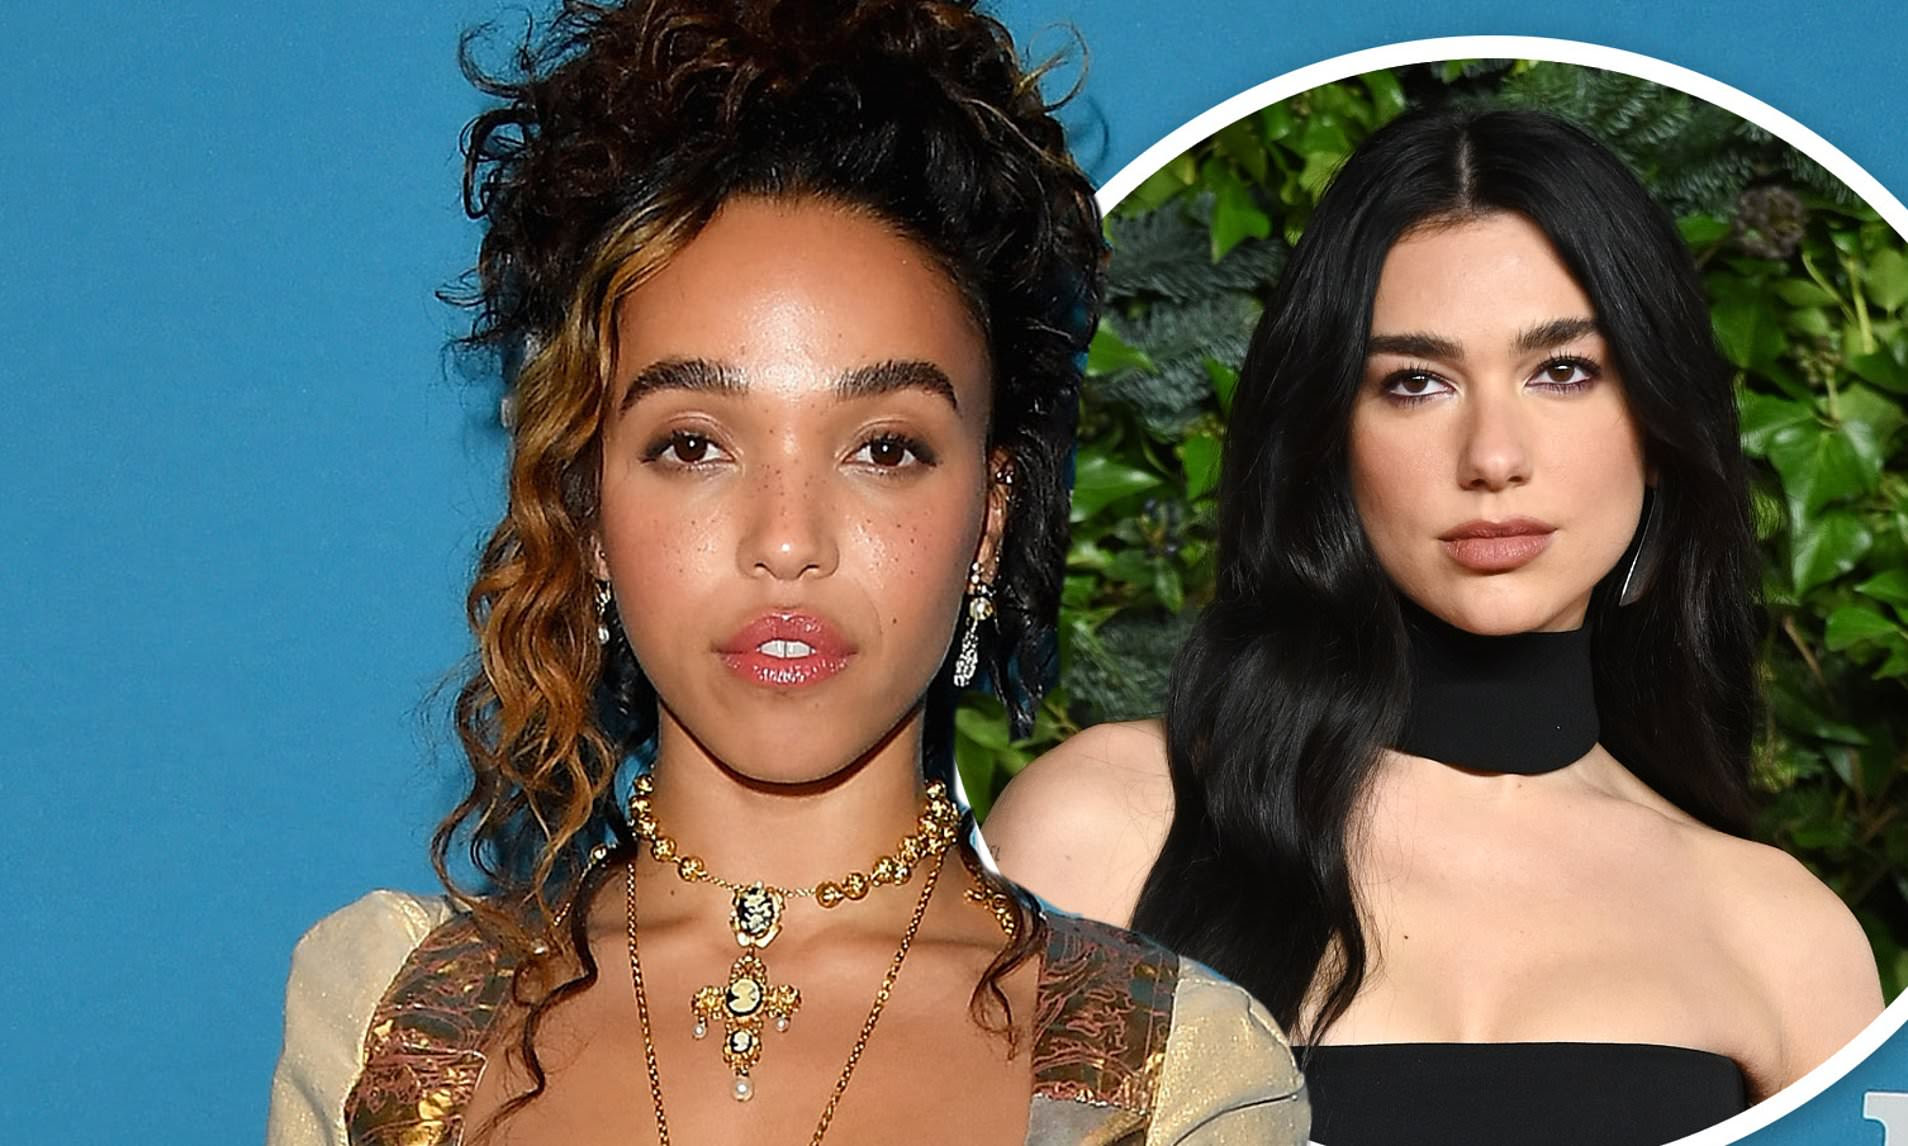 FKA twigs says that she needs to contact Dua Lipa about finishing an unreleased track